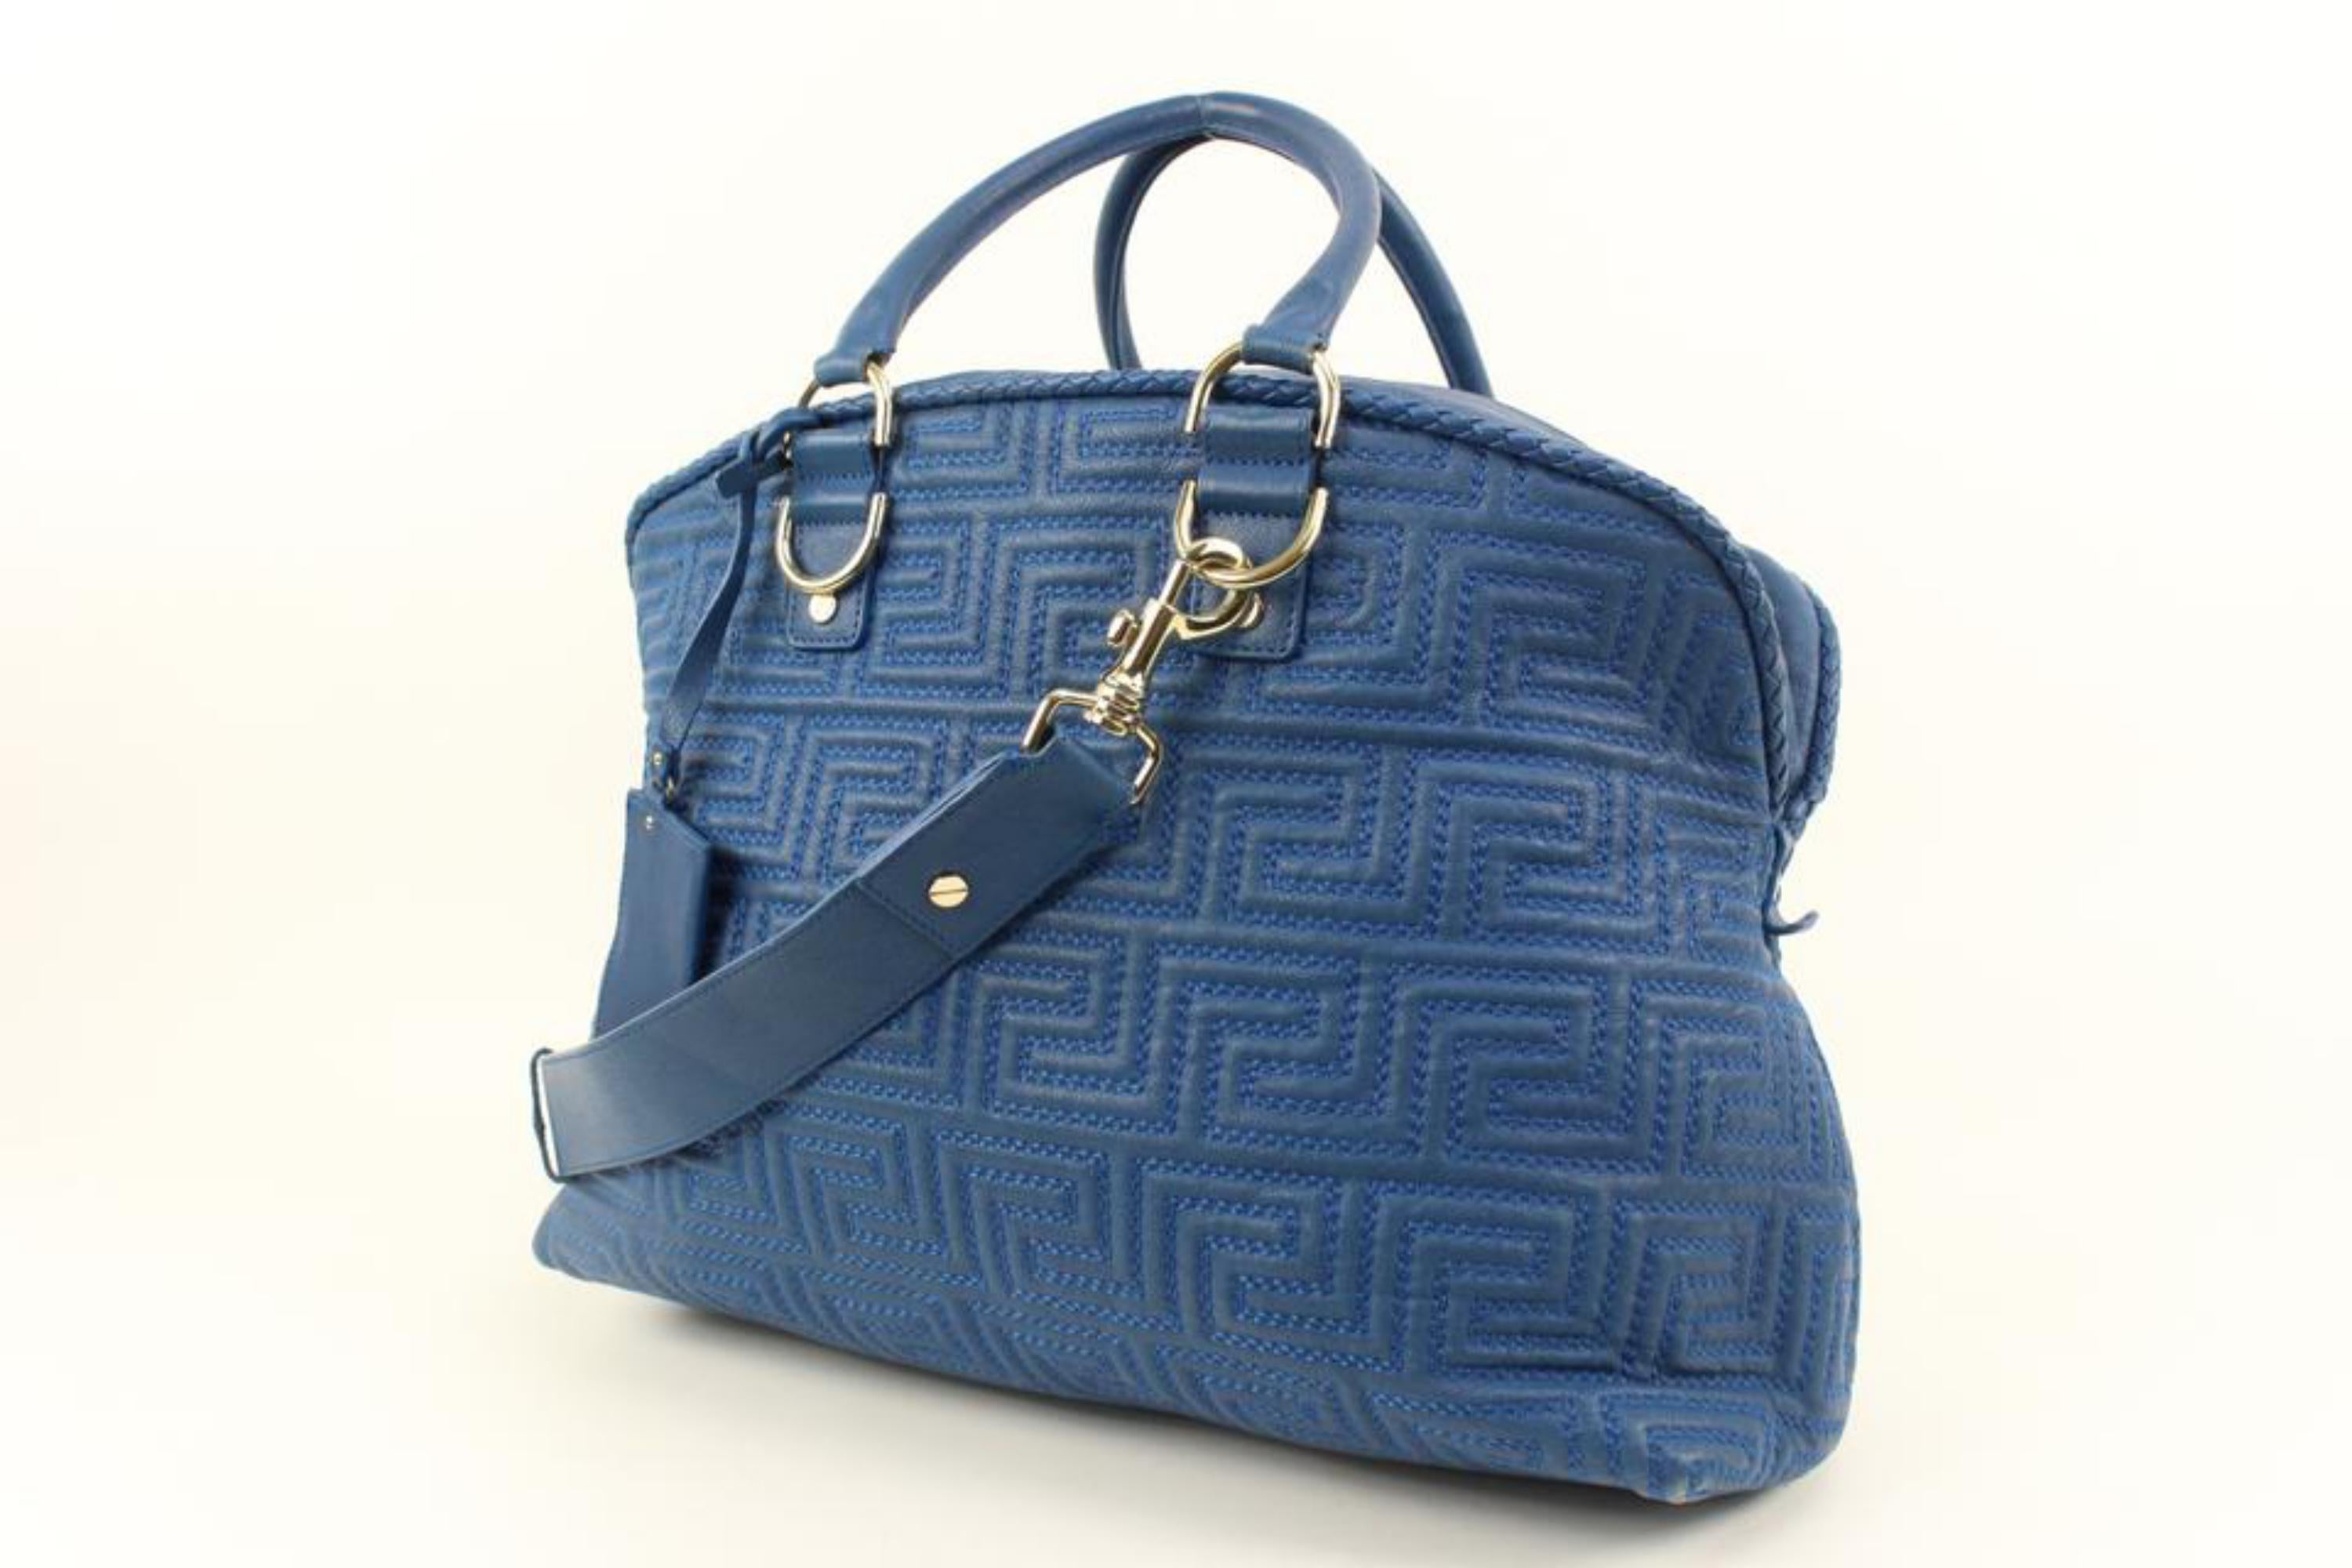 Versace Couture Blue Quilted Leather Athena Vanitas 2way Dome Satchel 5v34s
Date Code/Serial Number: CLG 445 396 704 107
Made In: Italy
Measurements: Length:  18